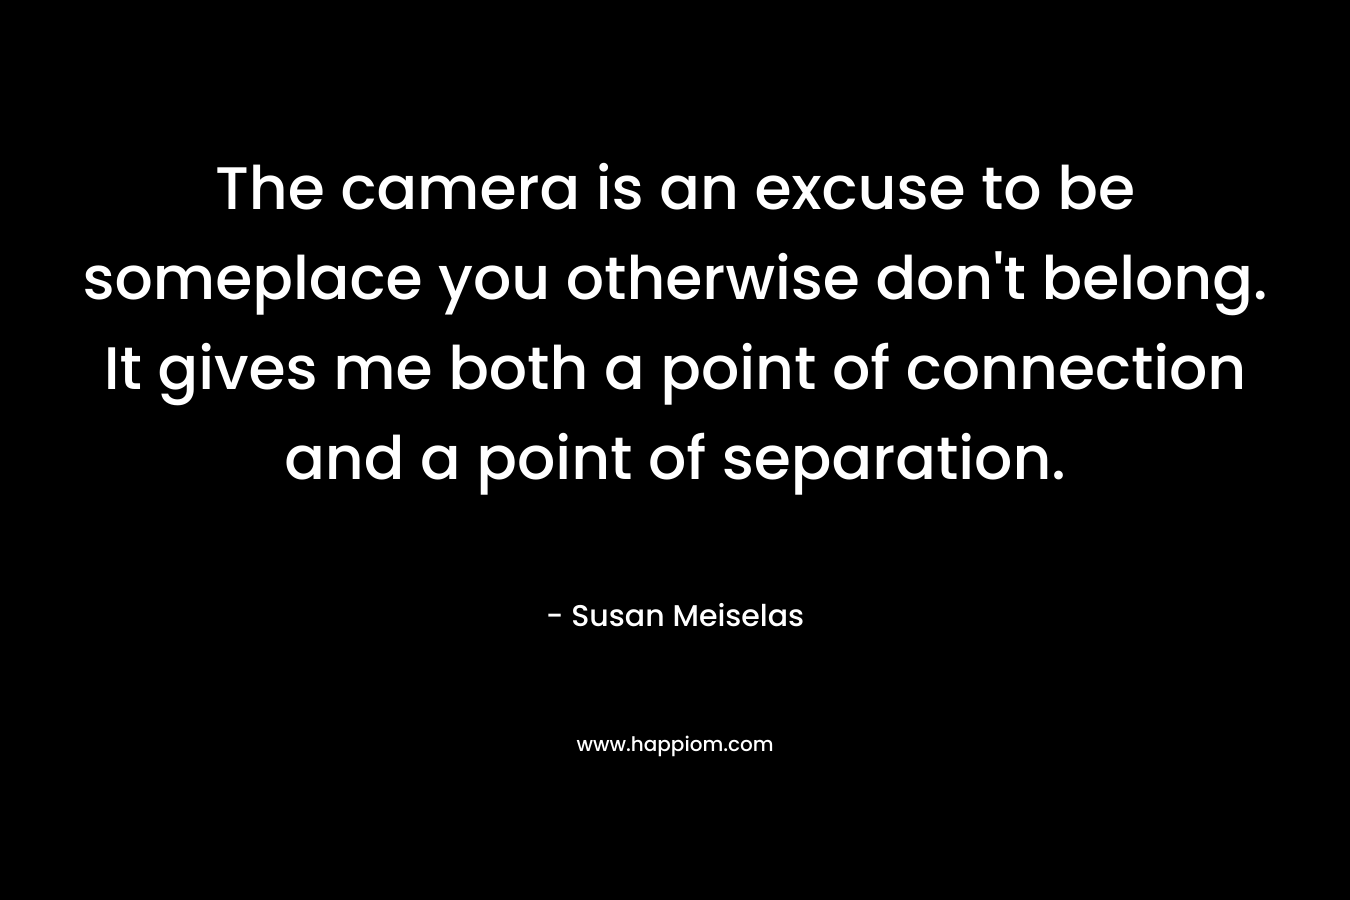 The camera is an excuse to be someplace you otherwise don’t belong. It gives me both a point of connection and a point of separation. – Susan Meiselas